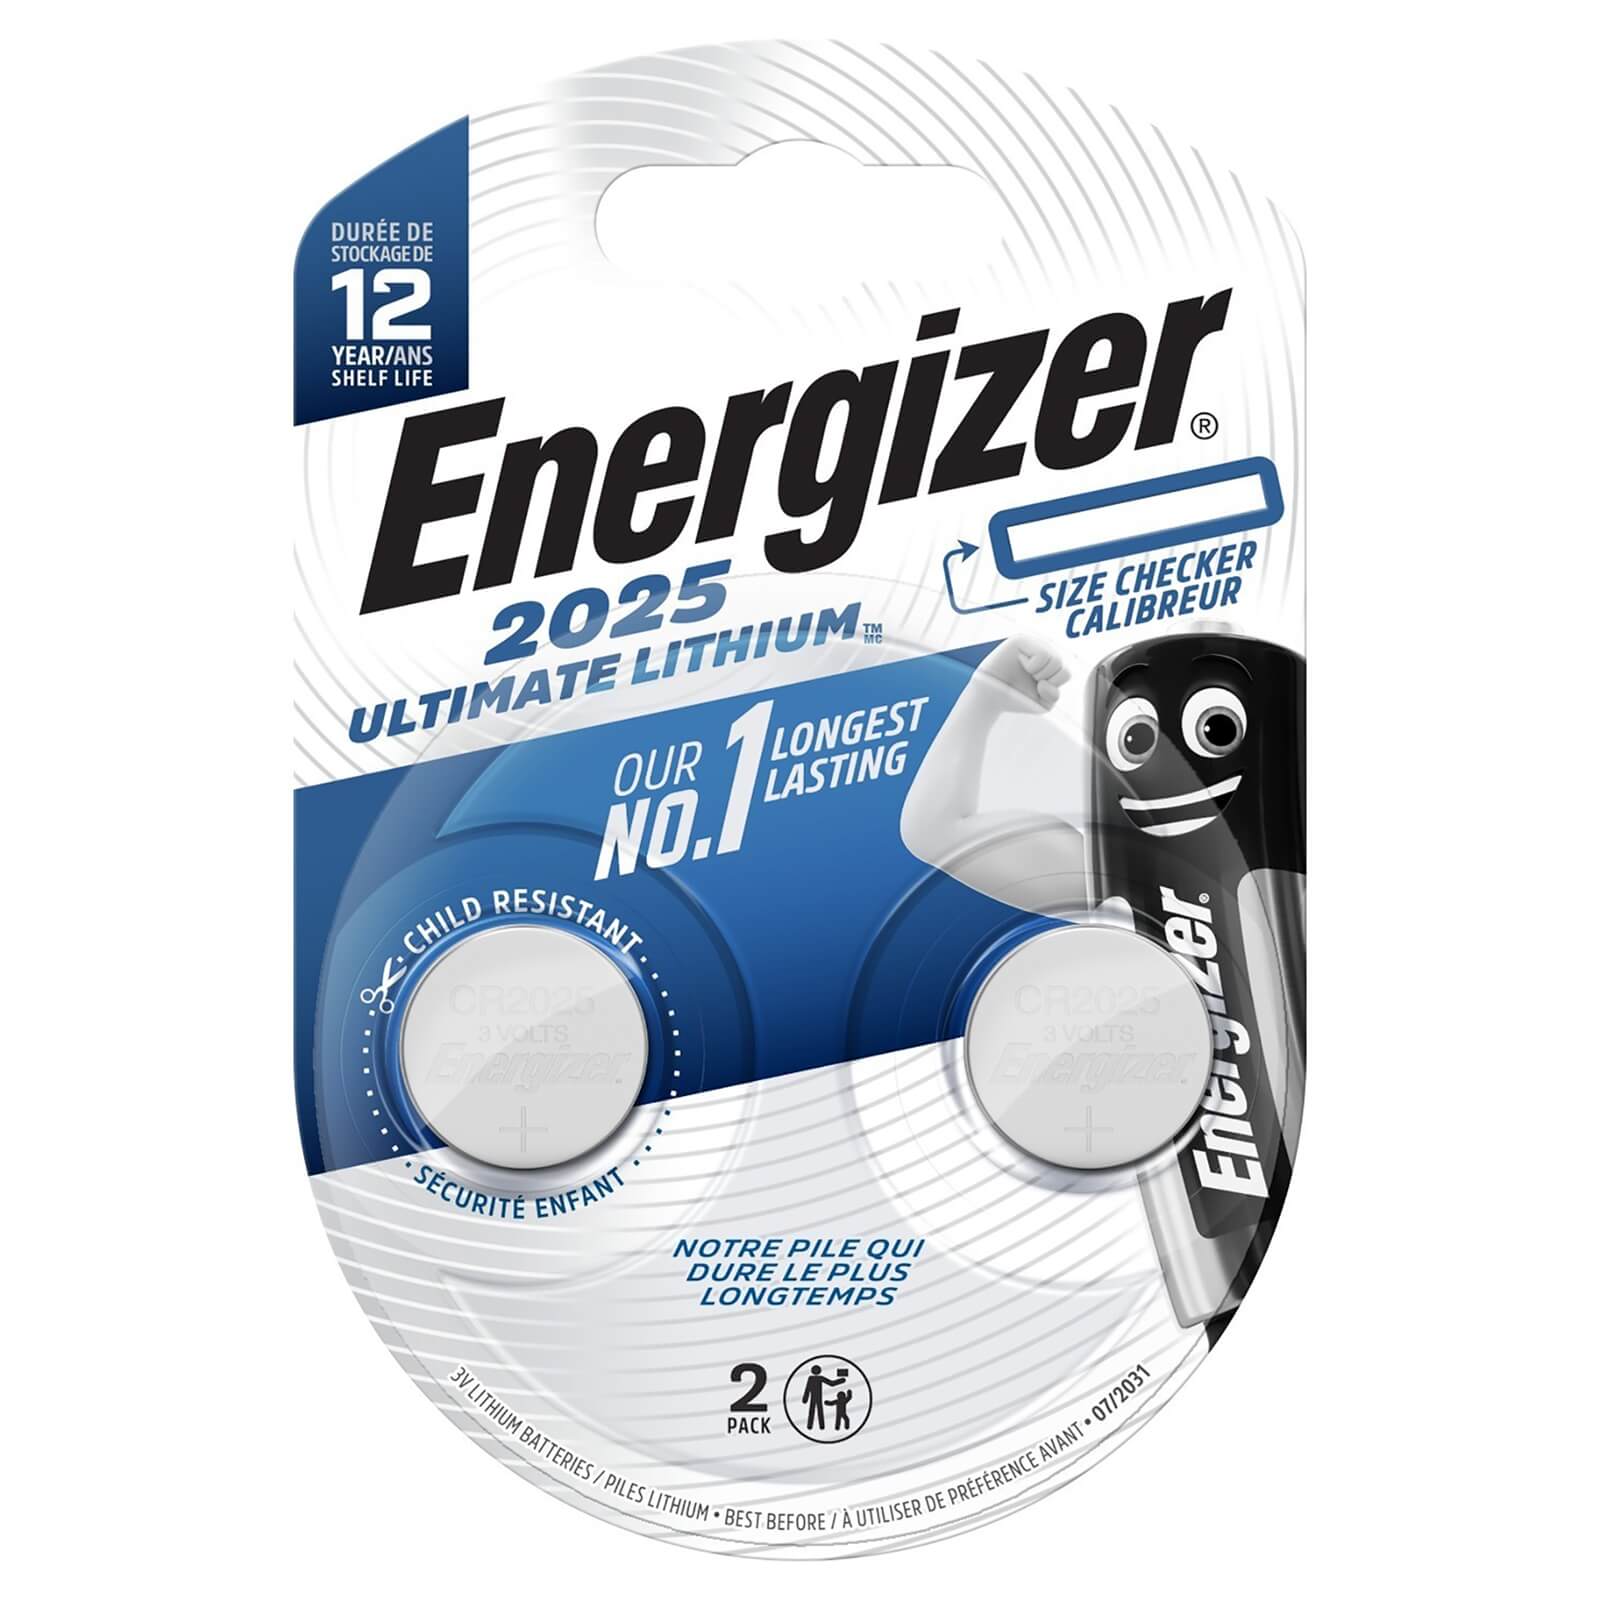 Energizer CR2025 Ultimate Lithium Coin Battery - 2 Pack